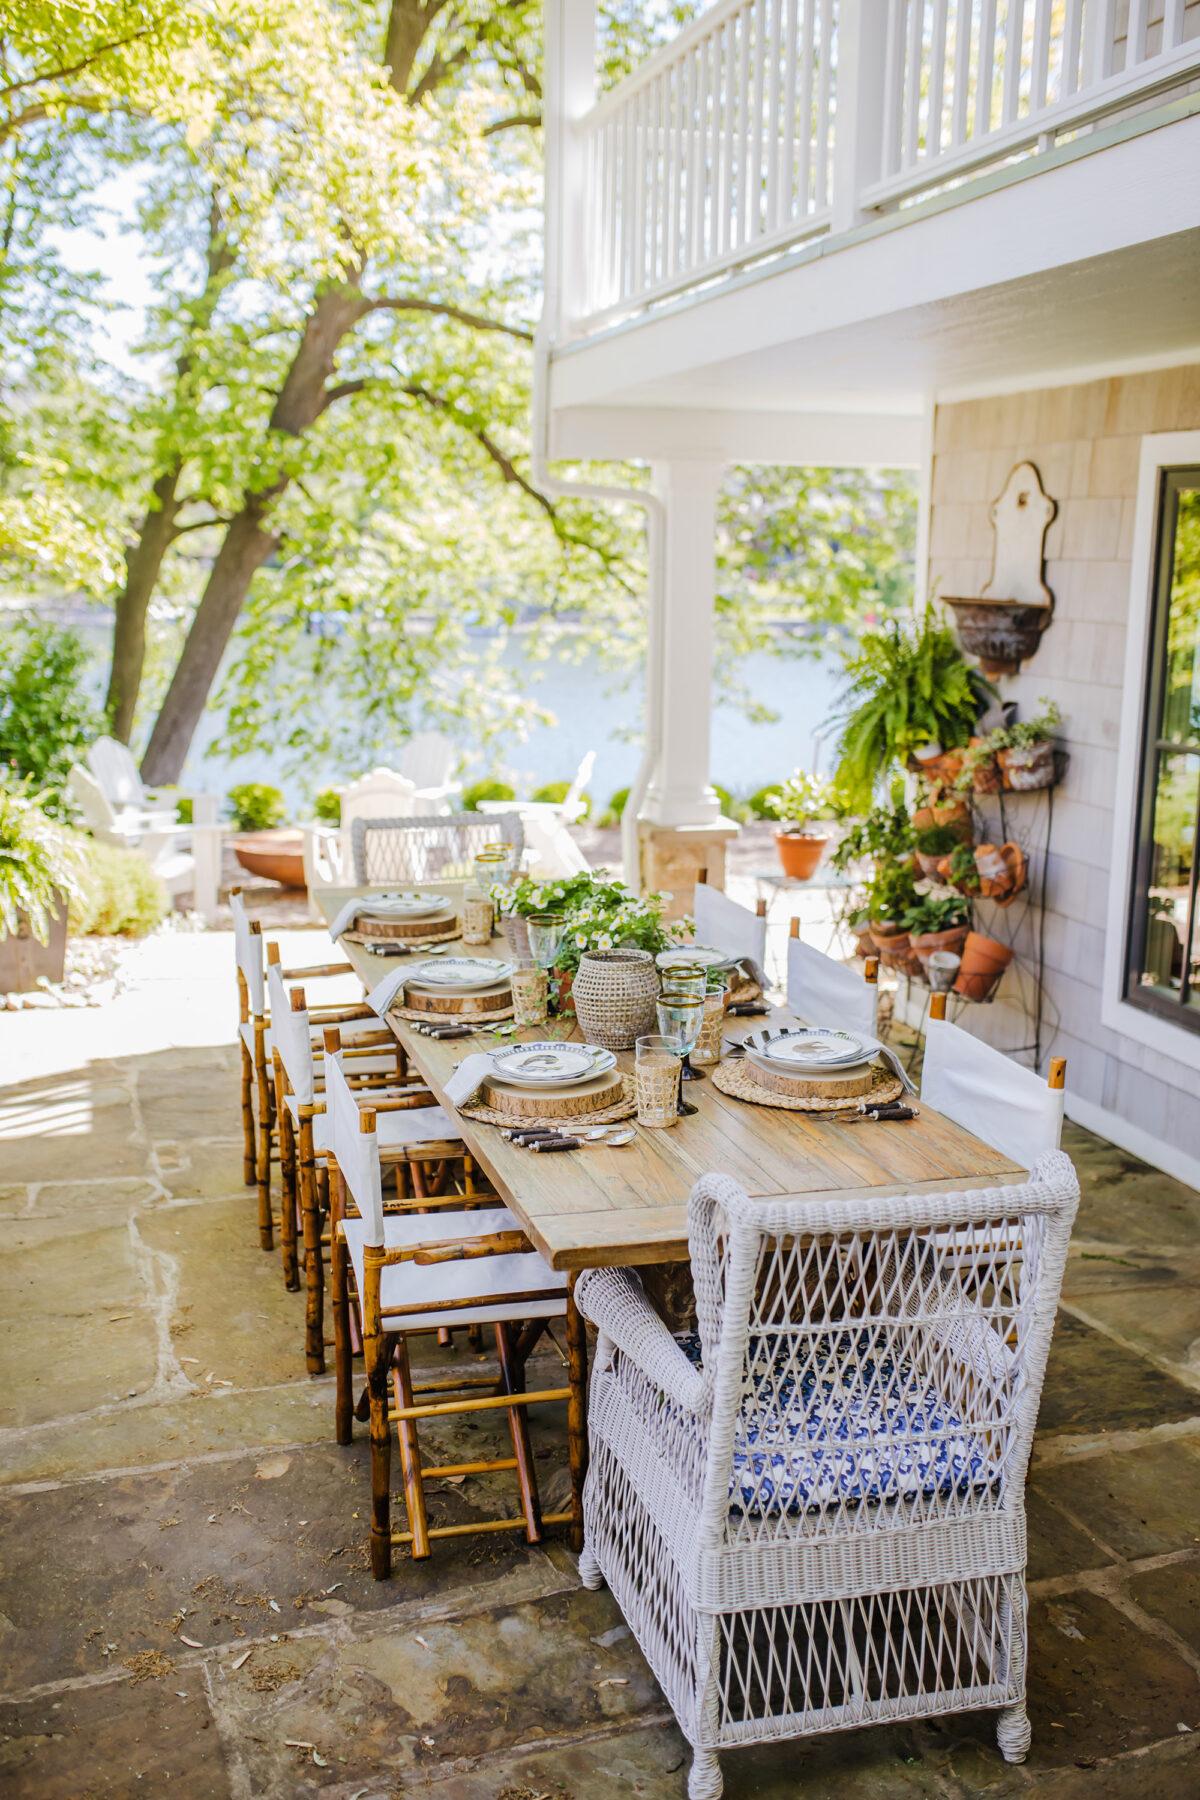 Oversized tables with lots of room for dishes and decorations are a must when it comes to outdoor entertaining. (Nell Hill’s/TNS)